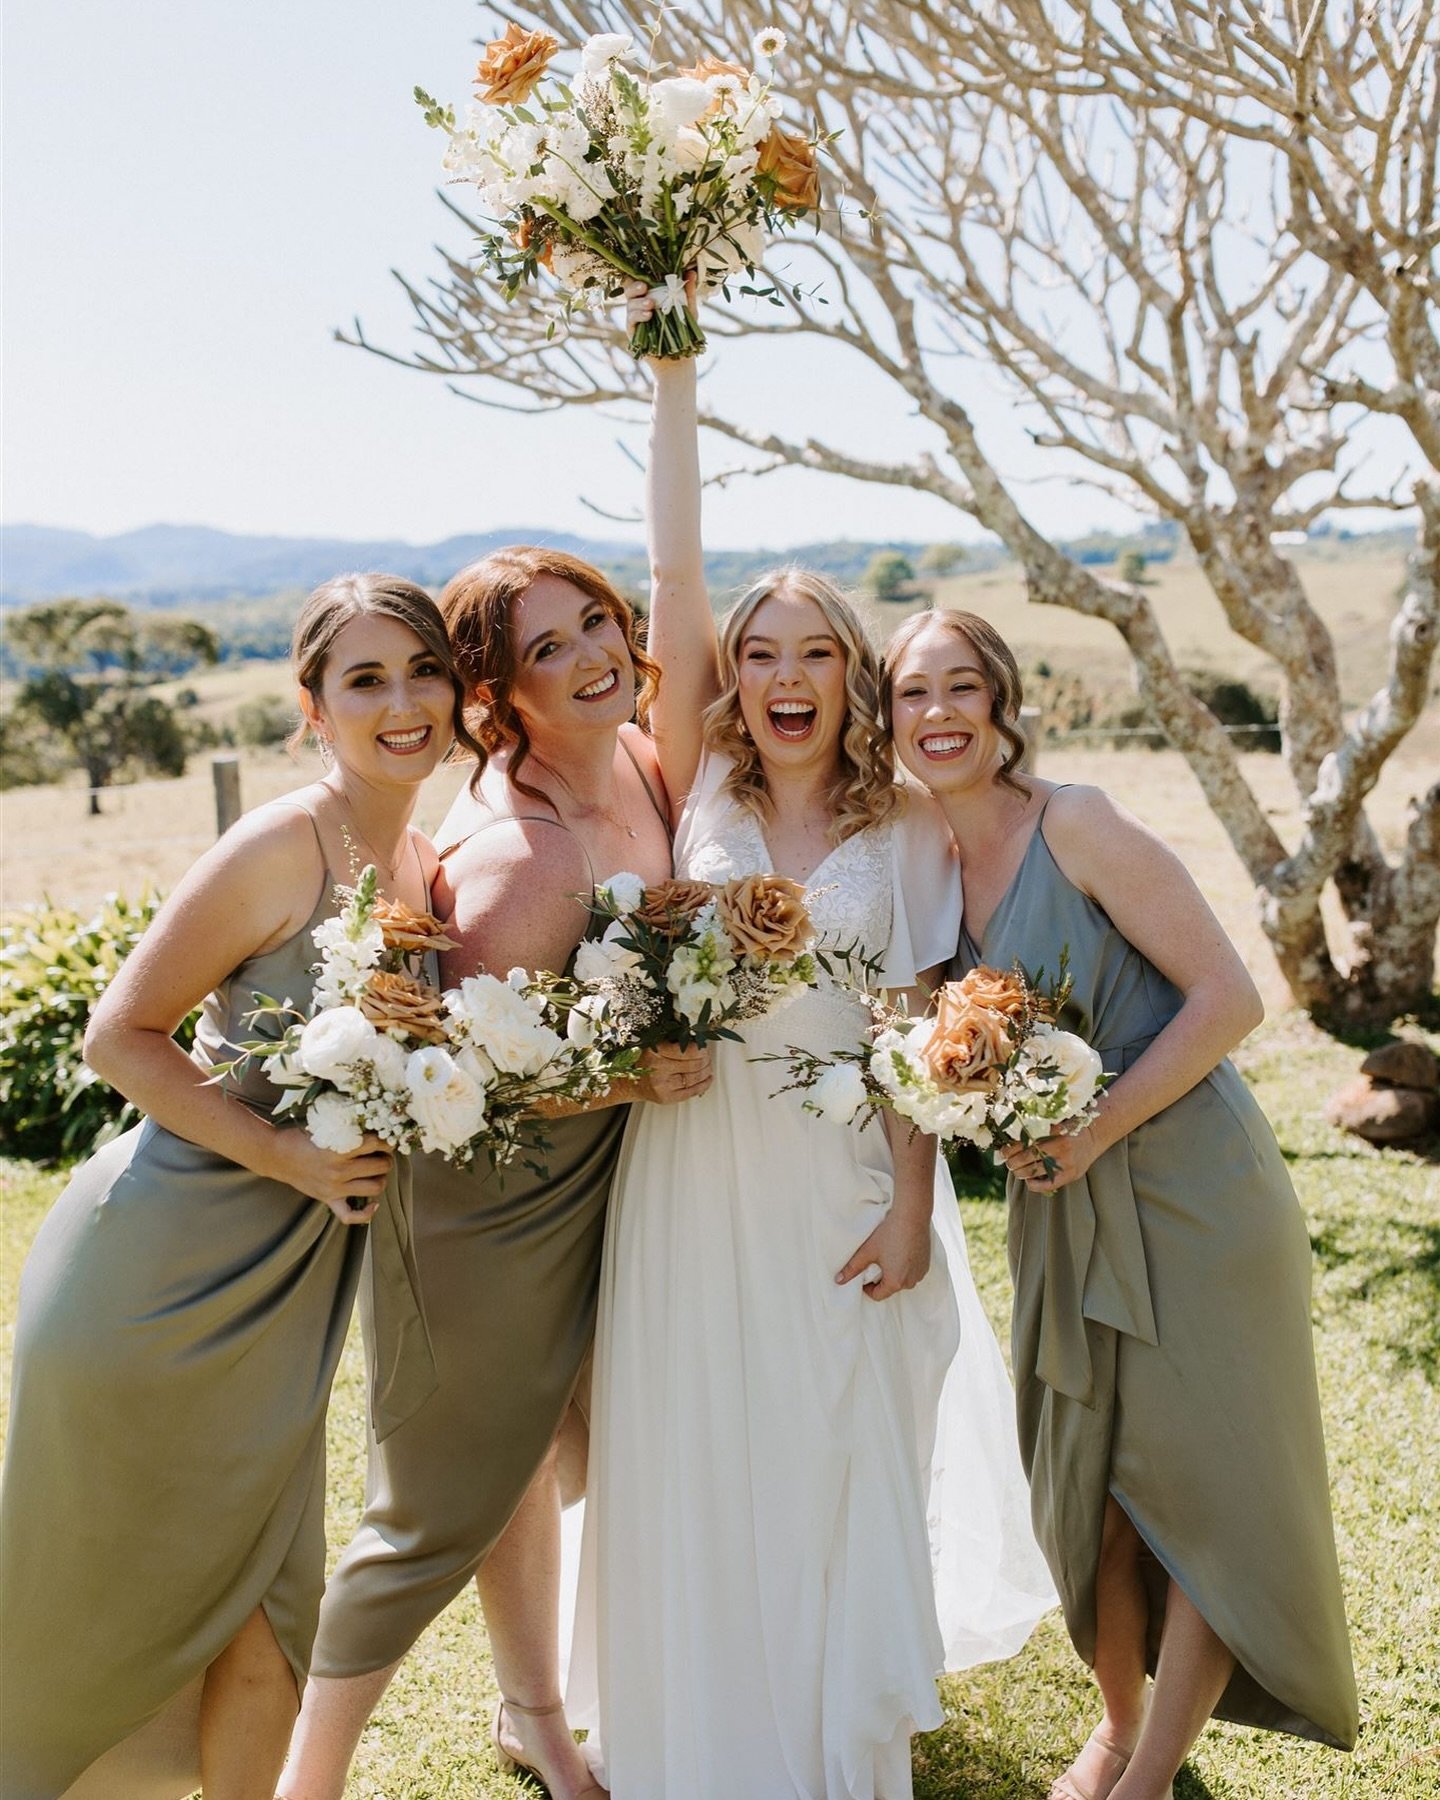 We get just as excited as our lovely bride Emma here when you choose us for your wedding day! 

We have limited availability for this year on peak season dates, so reach out and we would love to send you a quote. 

@emmaastrid_ 
Photography: @elinban